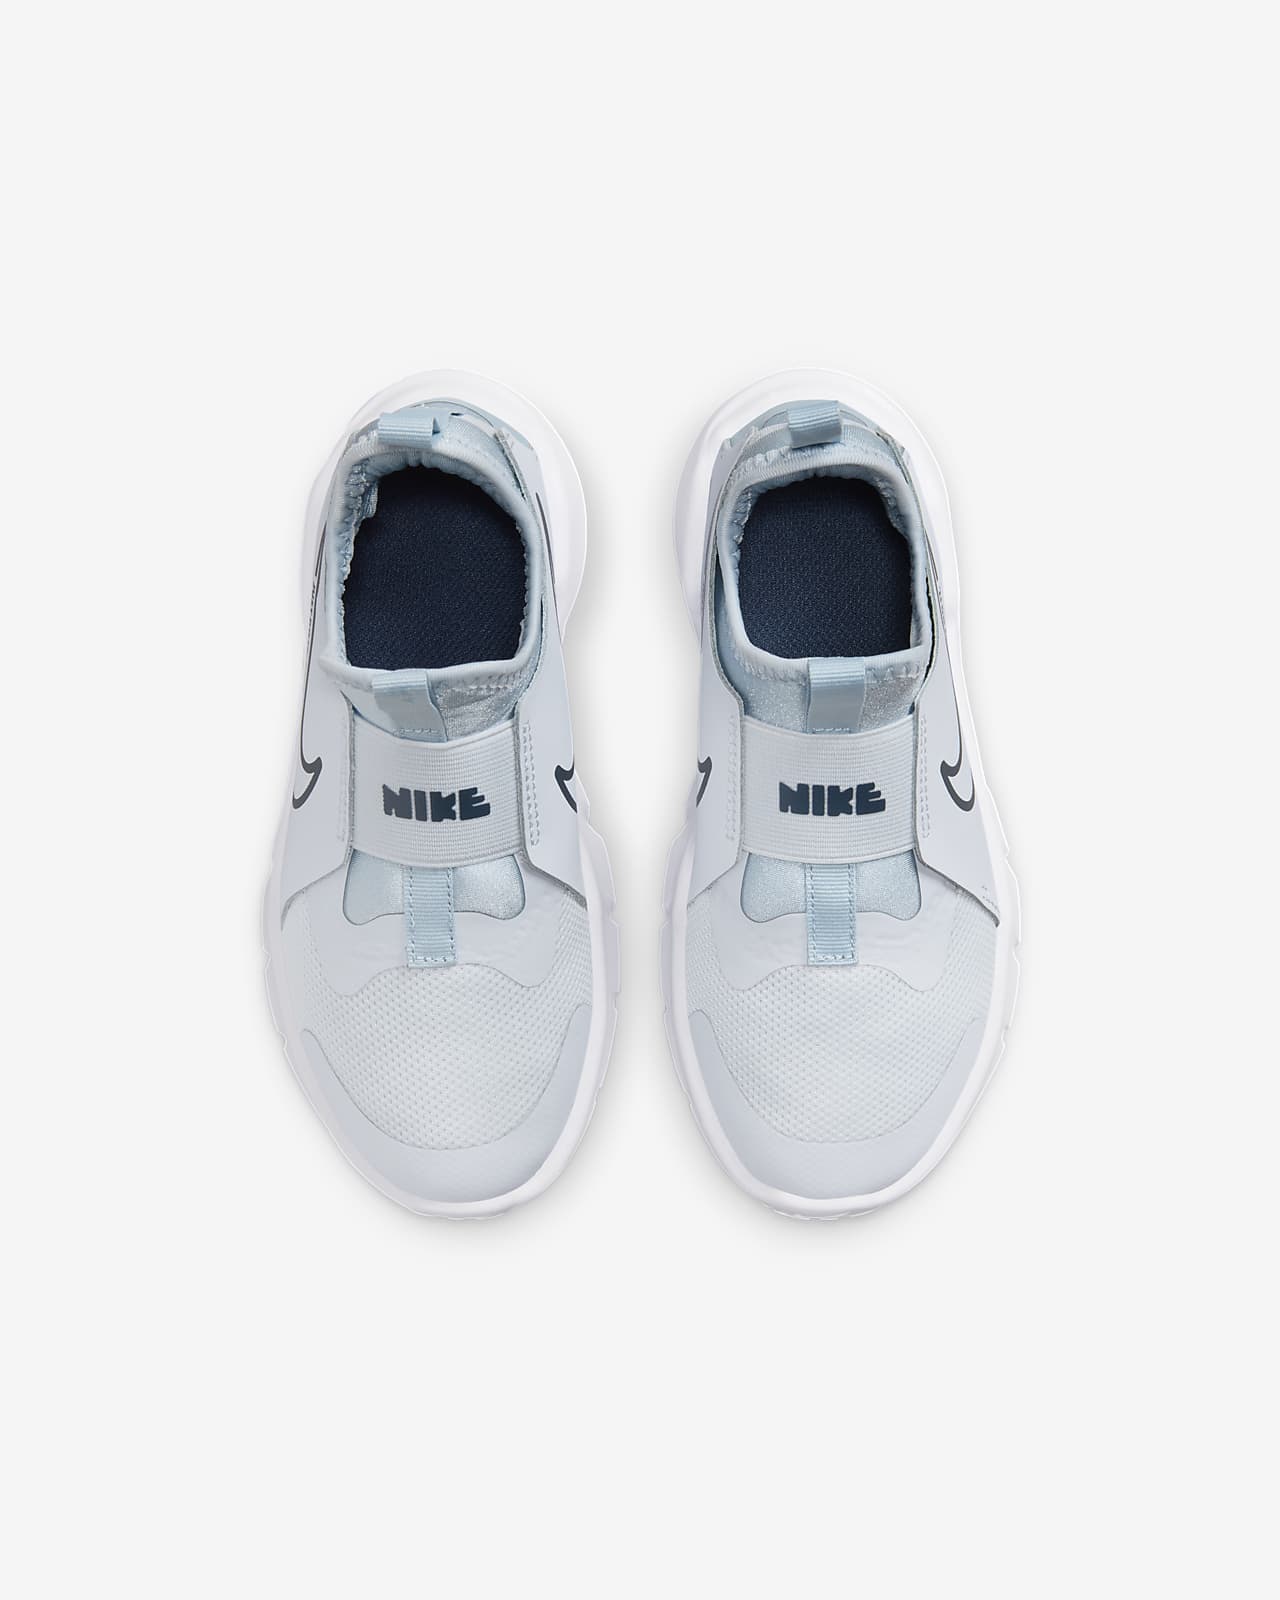 Chausson Nike enfant - Chausson Future Kids - Sneezy For Sneakers Addict